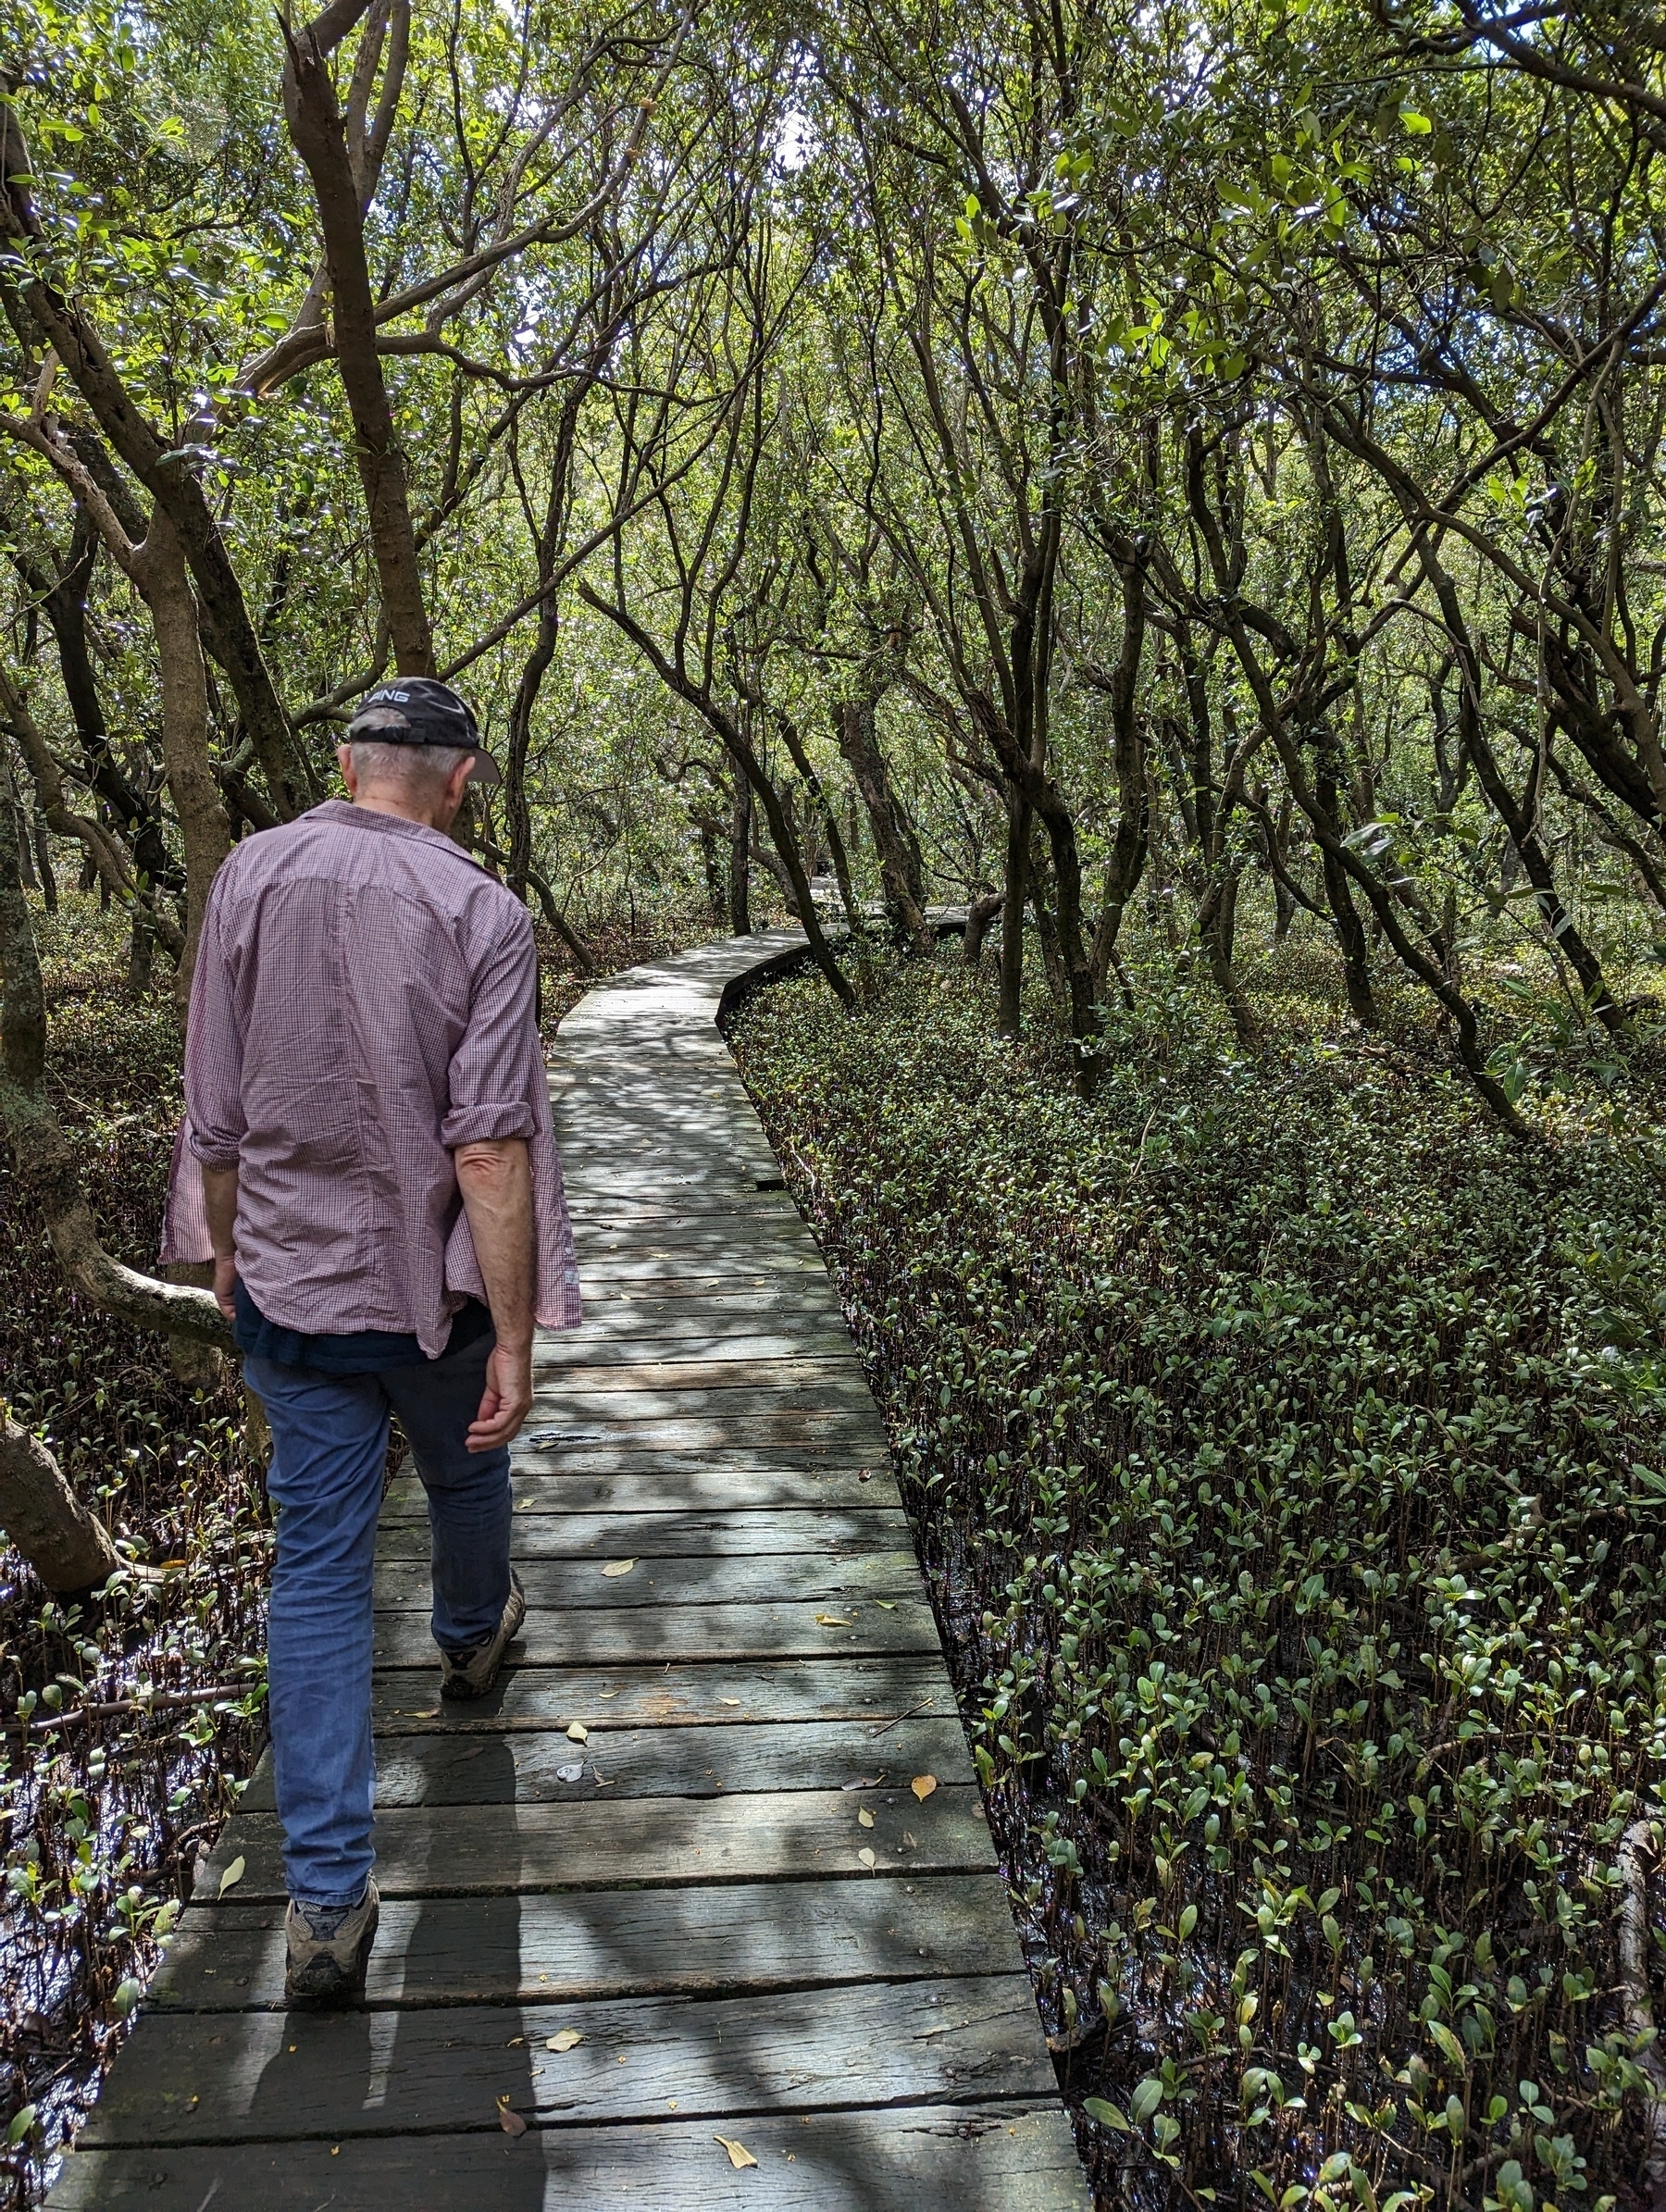 Rear view of a man walking through a mangrove forest along a wooden boardwalk that snakes into the distance.